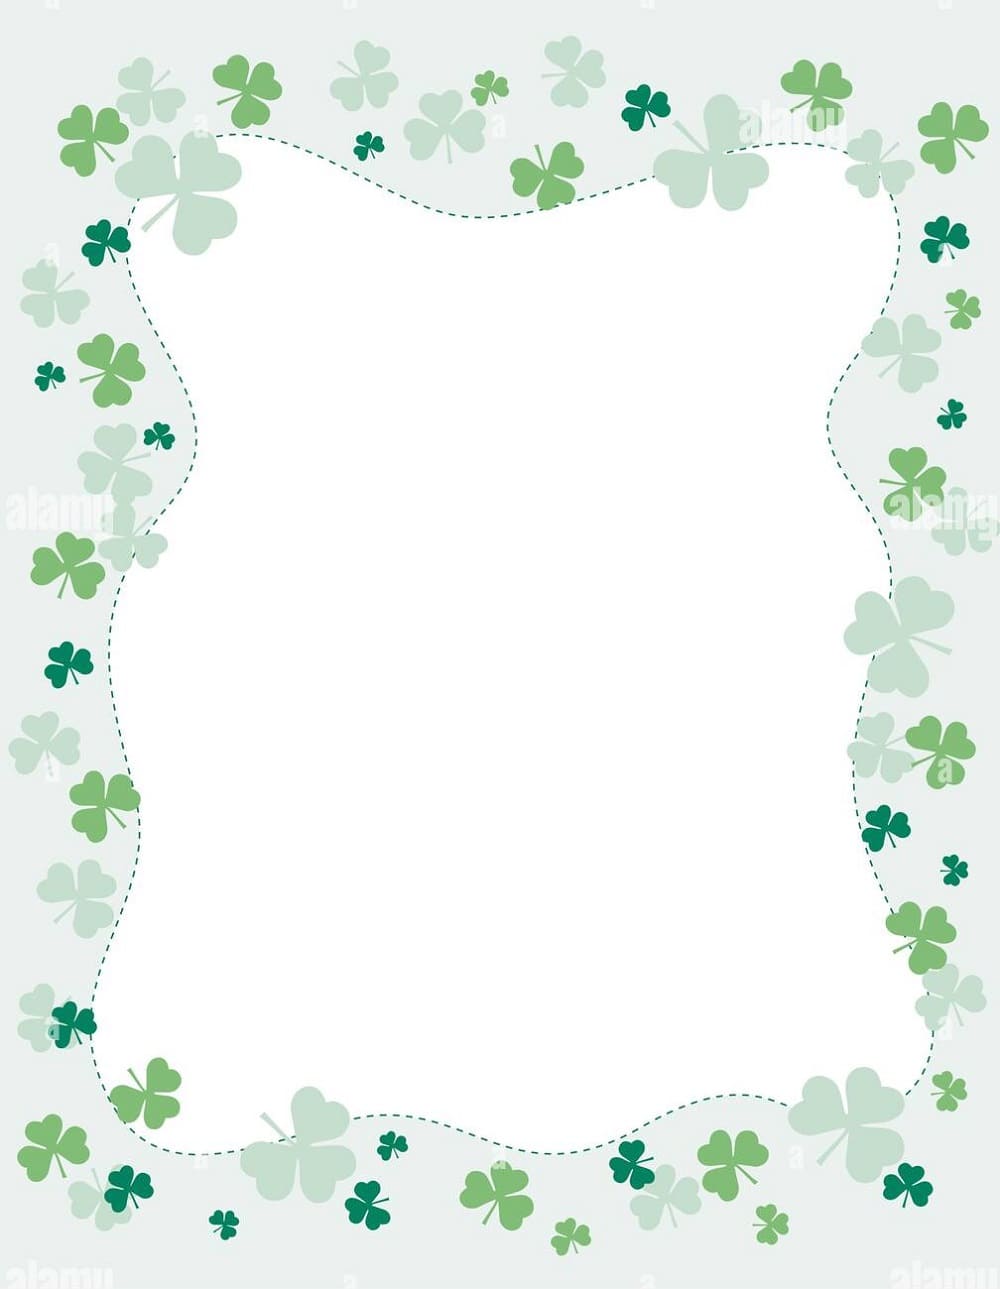 Download Picture of Saint Patrick’s Day Border